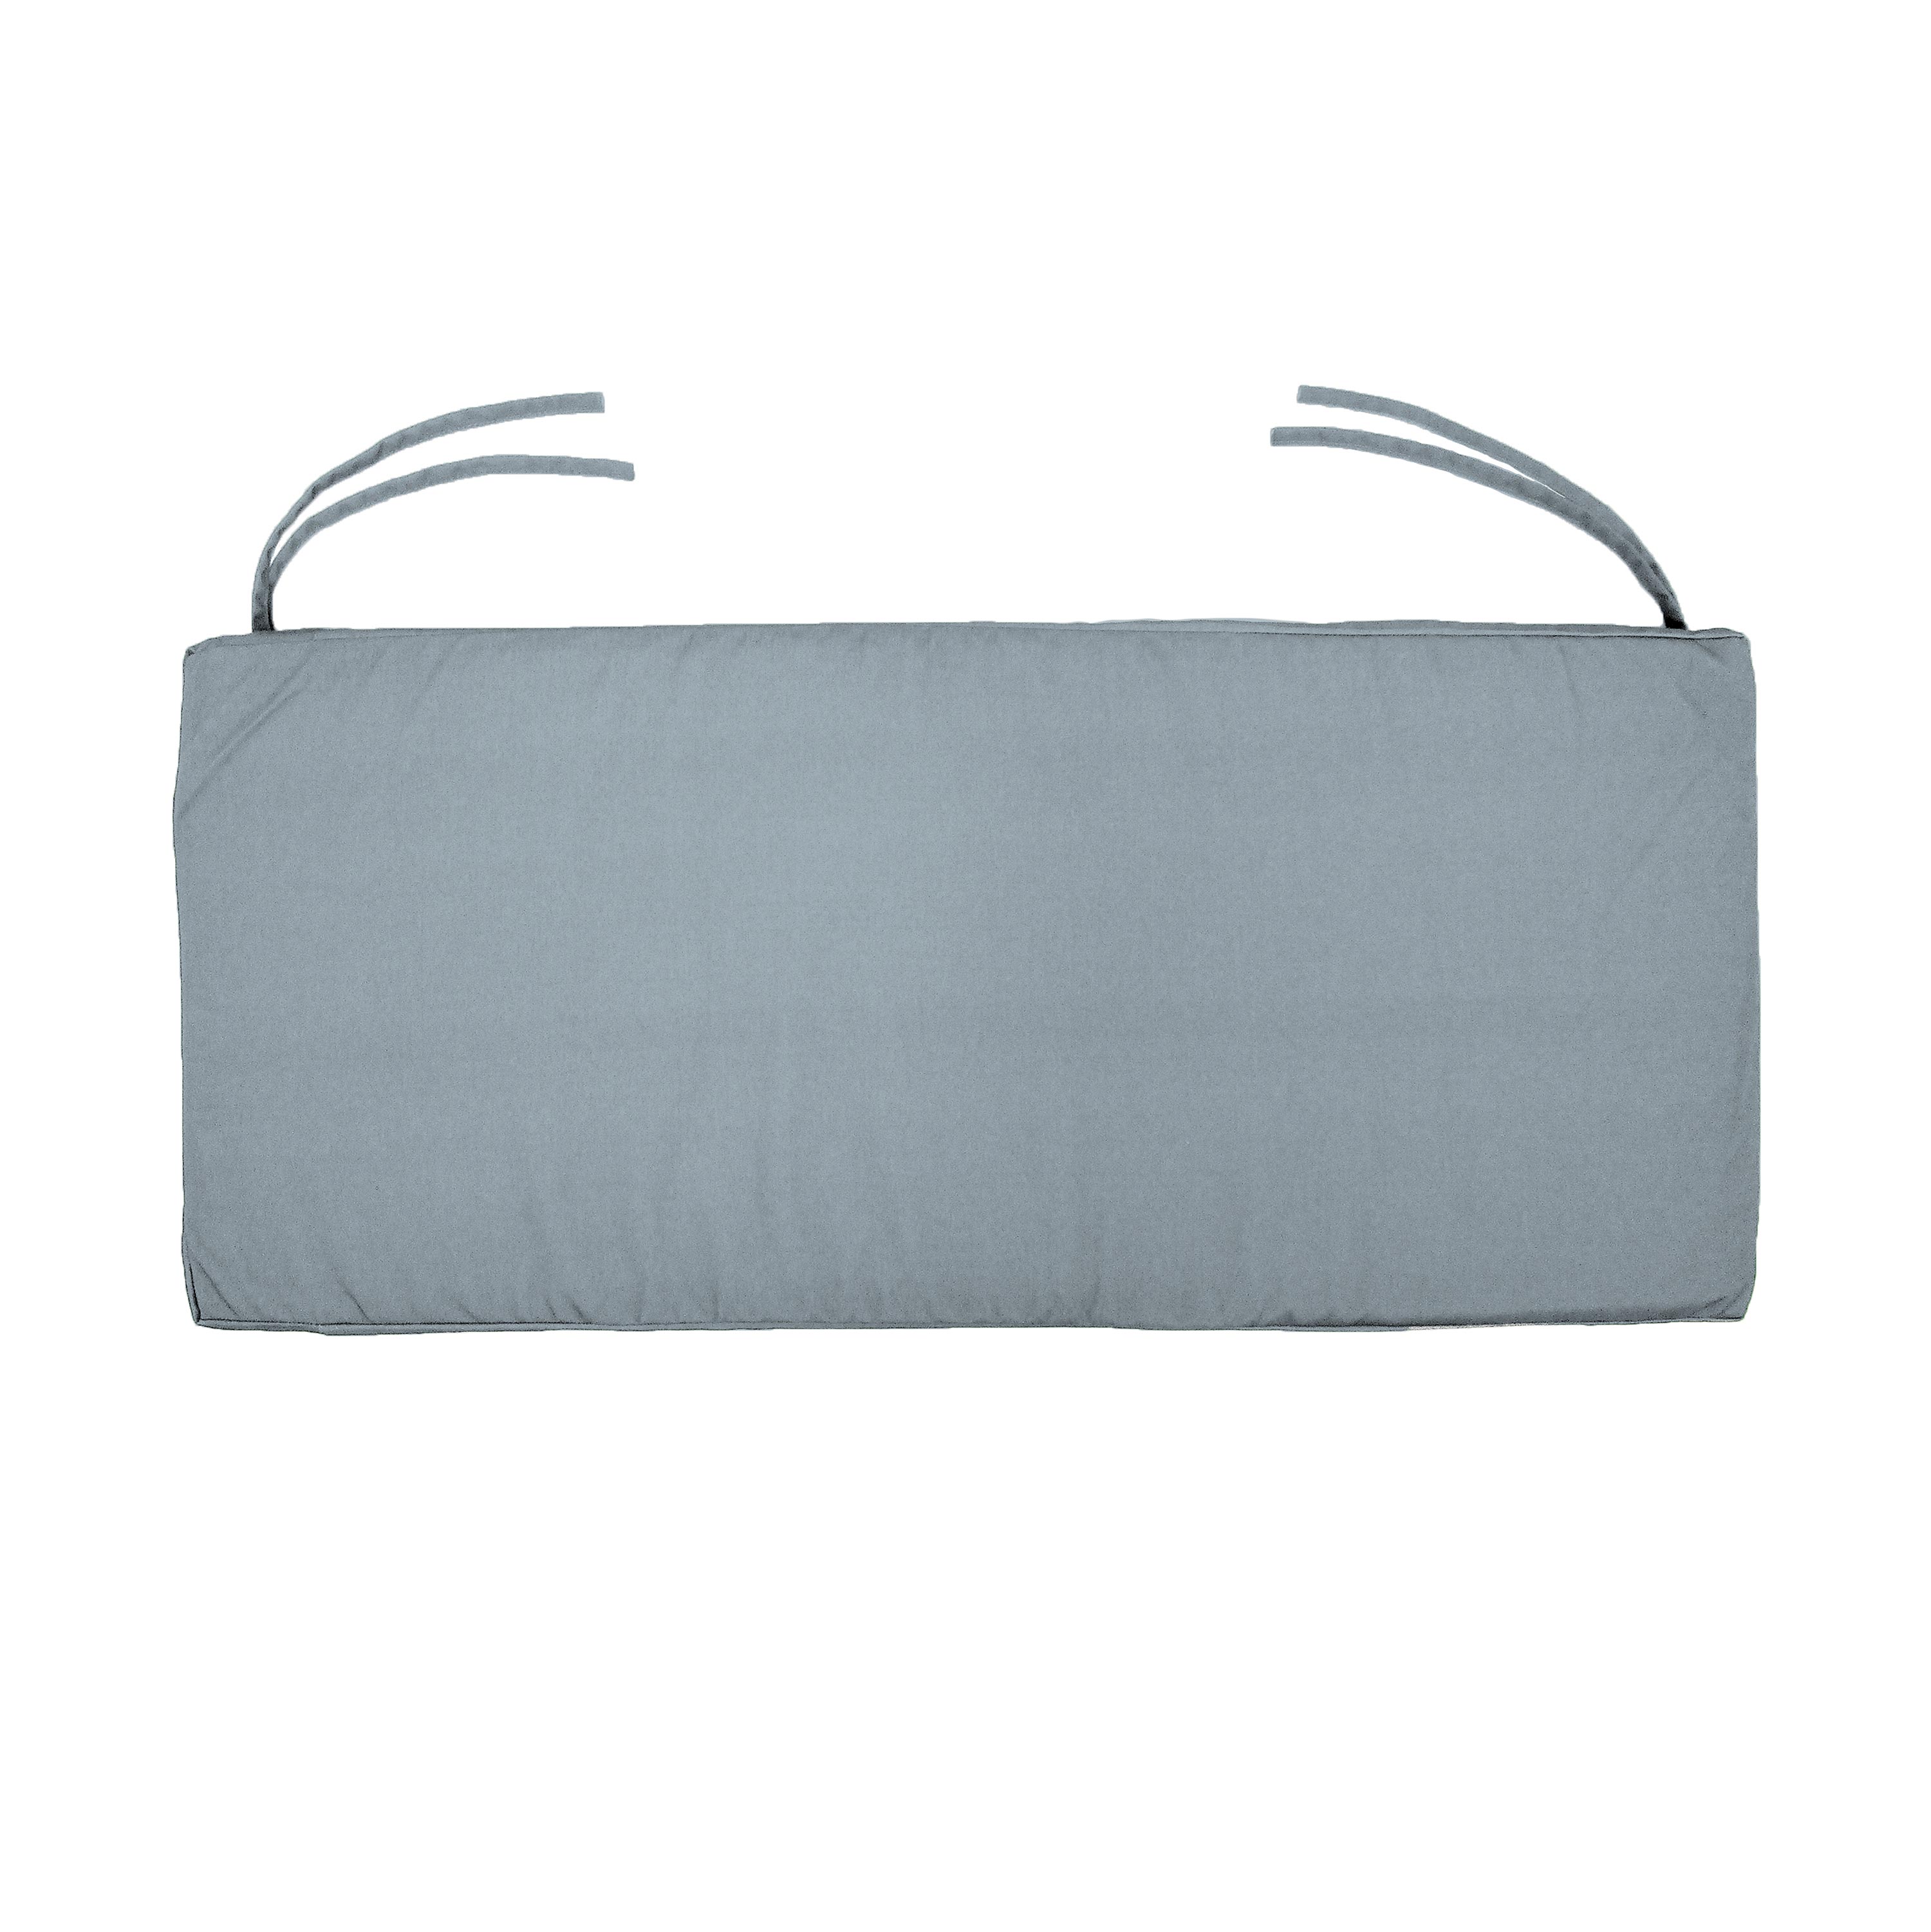 Classic Swing/Bench Cushion with Ties, 59" x 16" x 3"